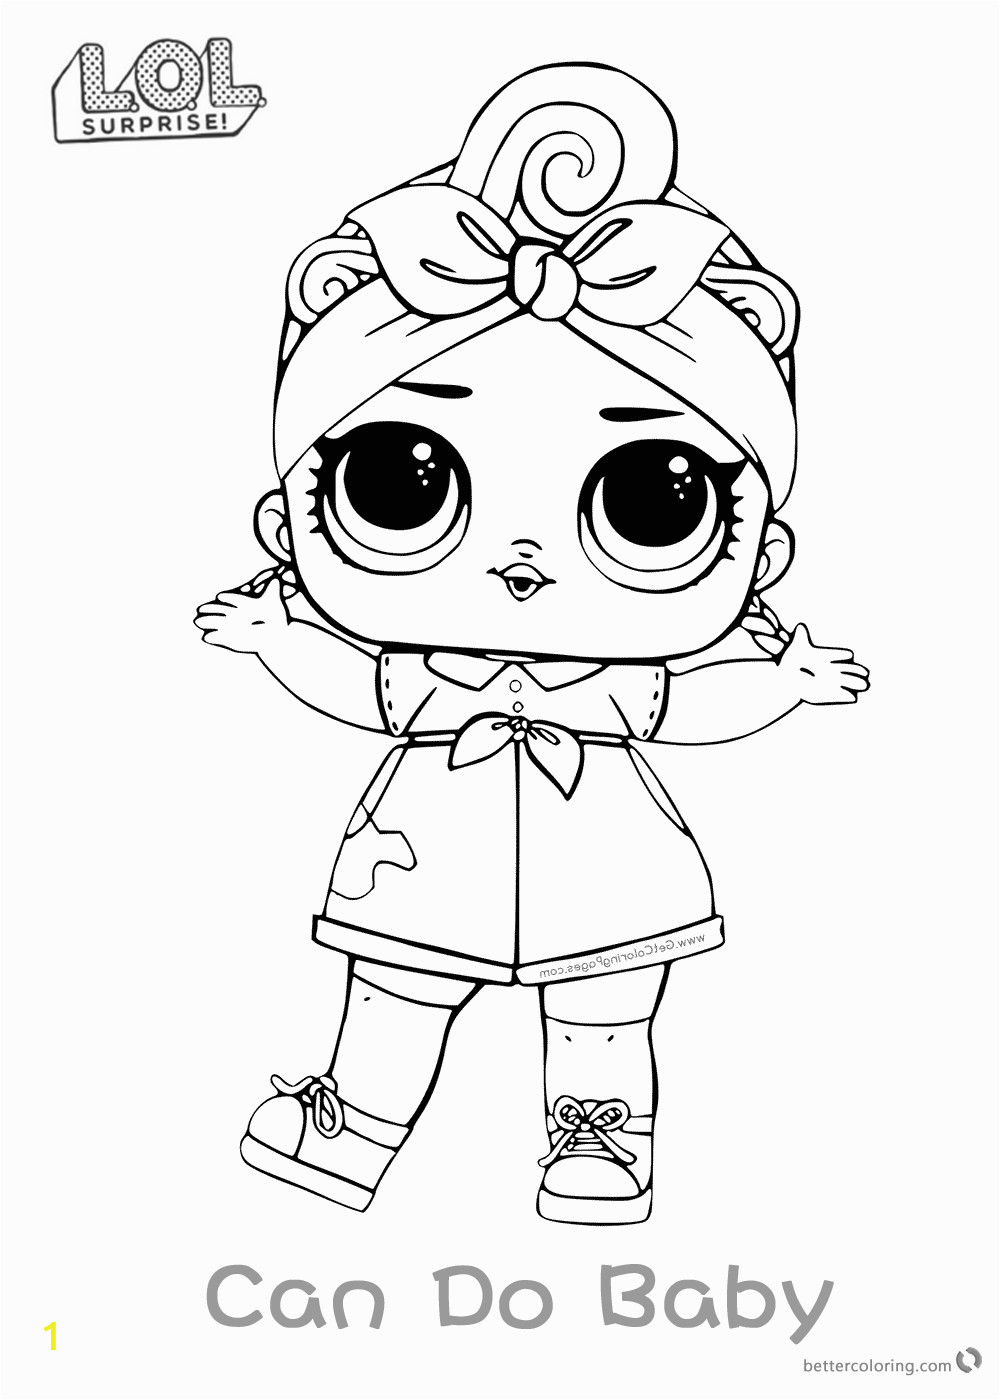 surprise doll coloring pages series 3 can do baby